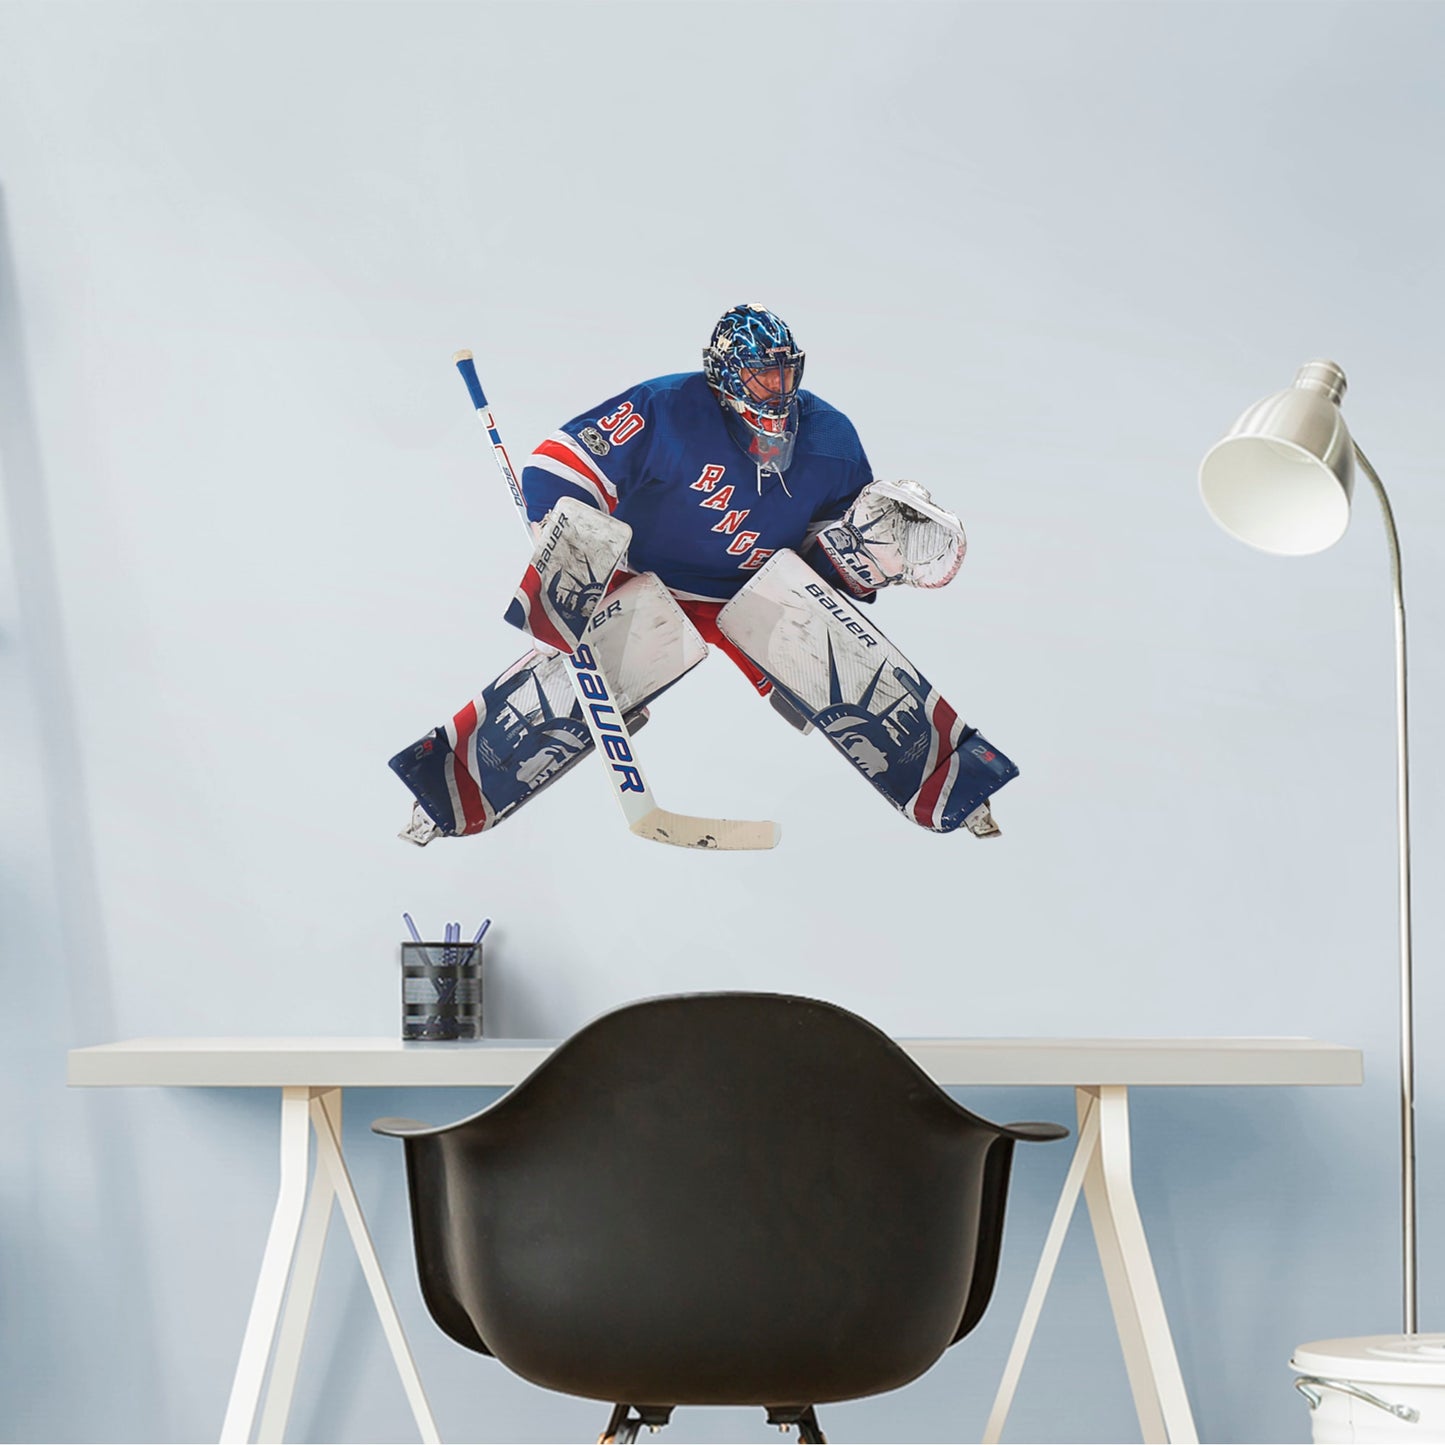 Nothing gets past The King! Celebrate the impressive goaltending career of Henrik Lundqvist with this sturdy removable wall decal depicting him poised to stop that puck. The gold-medal-winning hockey player looks great on any office or bedroom wall, and, unlike this goalie, the decal can be repositioned over time. It's also a great gift for anyone who appreciates Lundqvist's unique approach to tending goal!